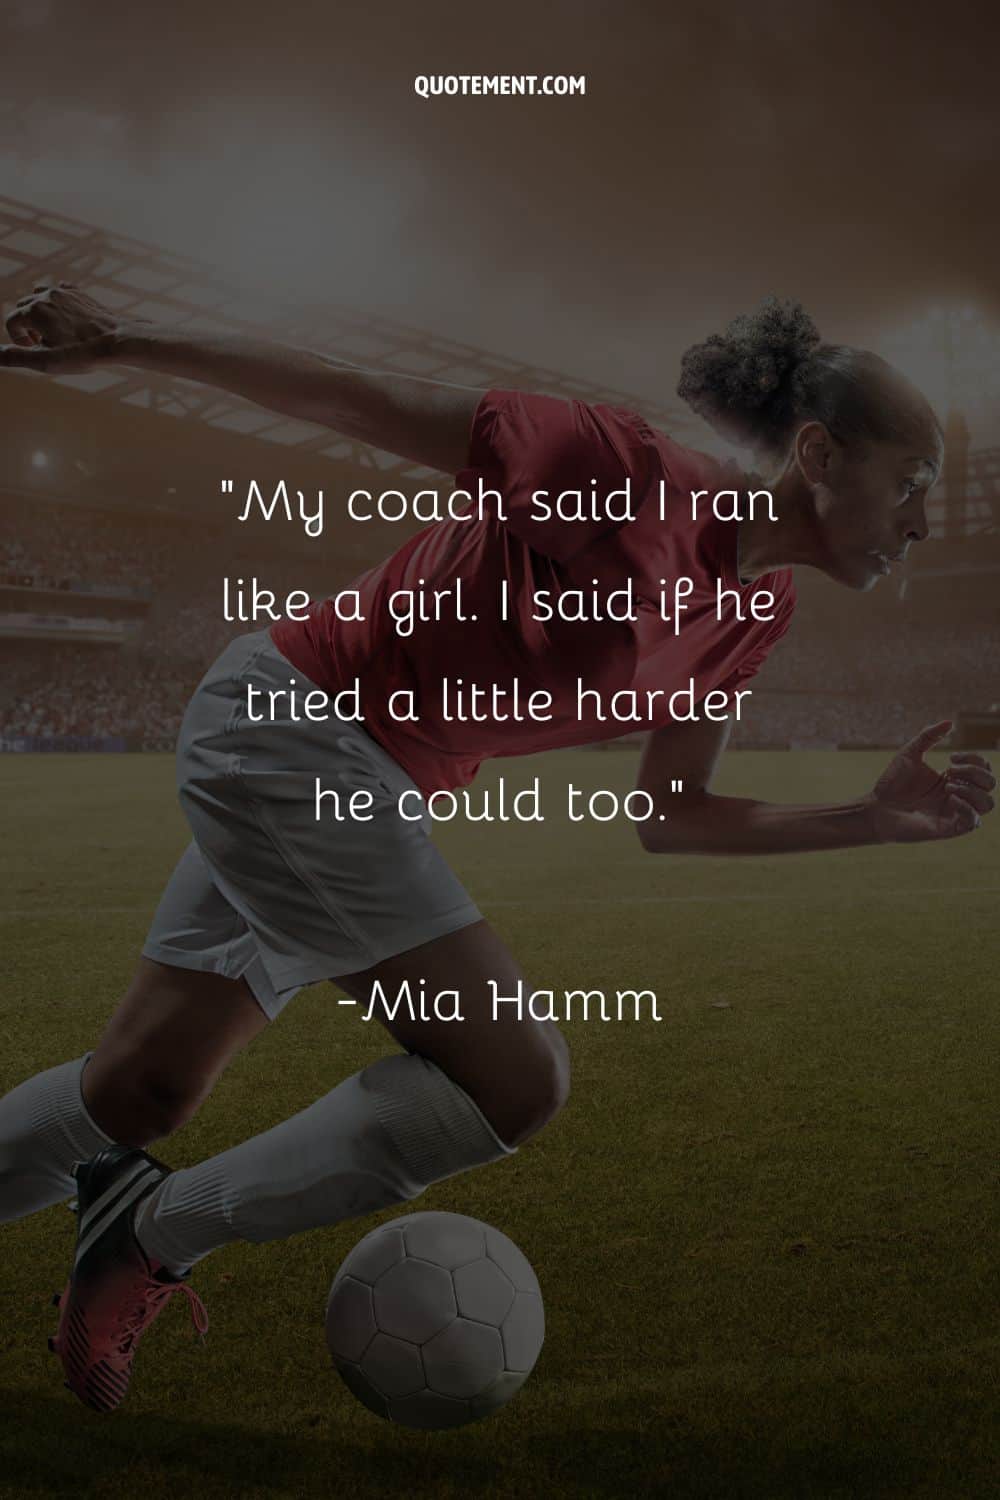 female soccer player dominates the field representing girl soccer quote